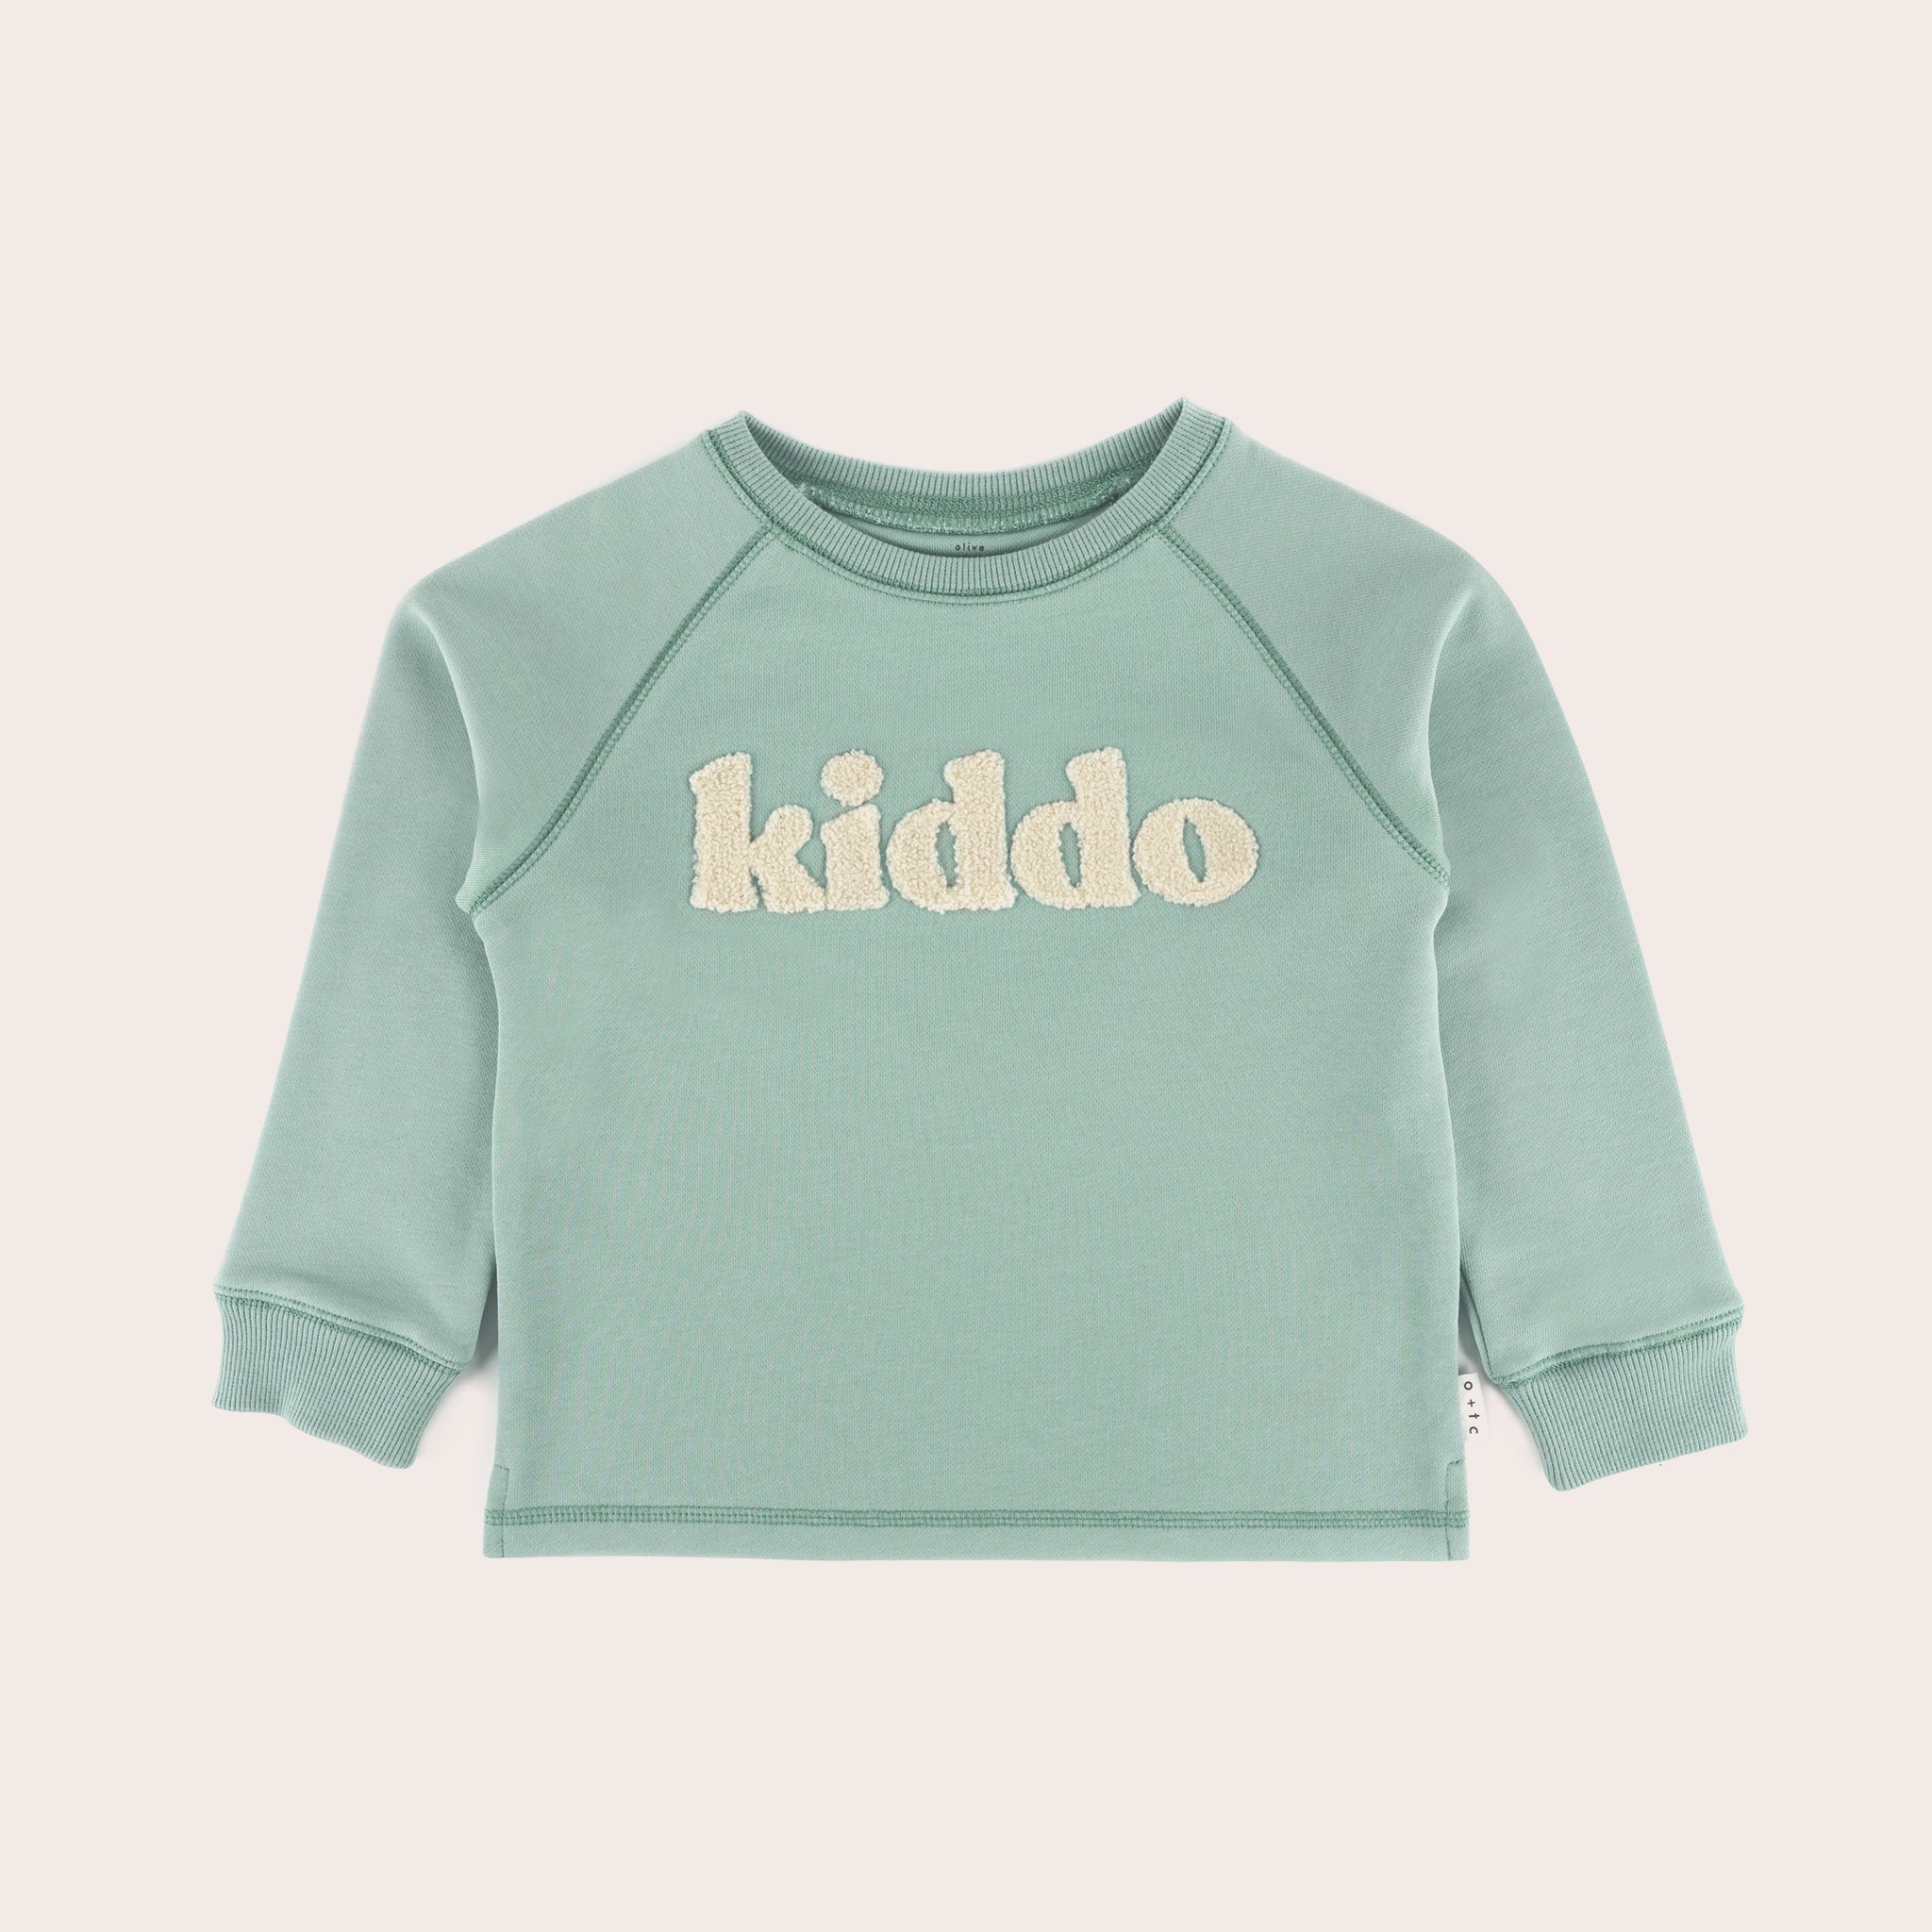 KIDDO EMBROIDERED SWEATER